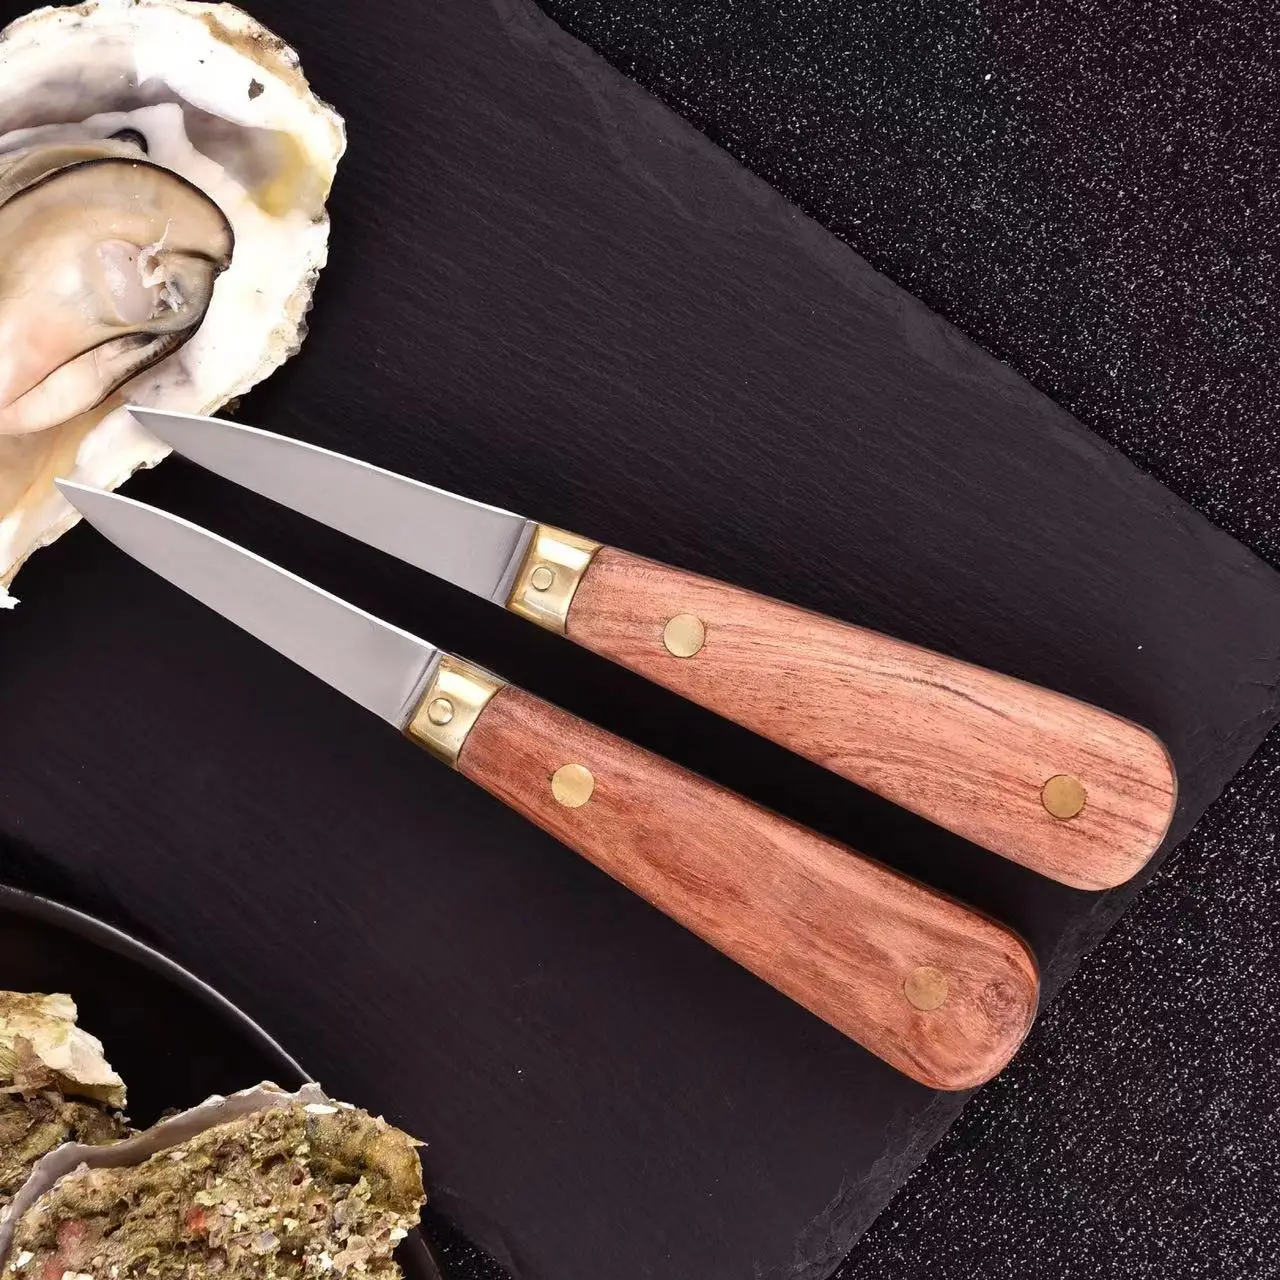 Stainless Steel Wood Handle Seafood Tools Handmade Shucking Oyster Knife and Opener For Shrimp Lobster oyste Shucking Knife